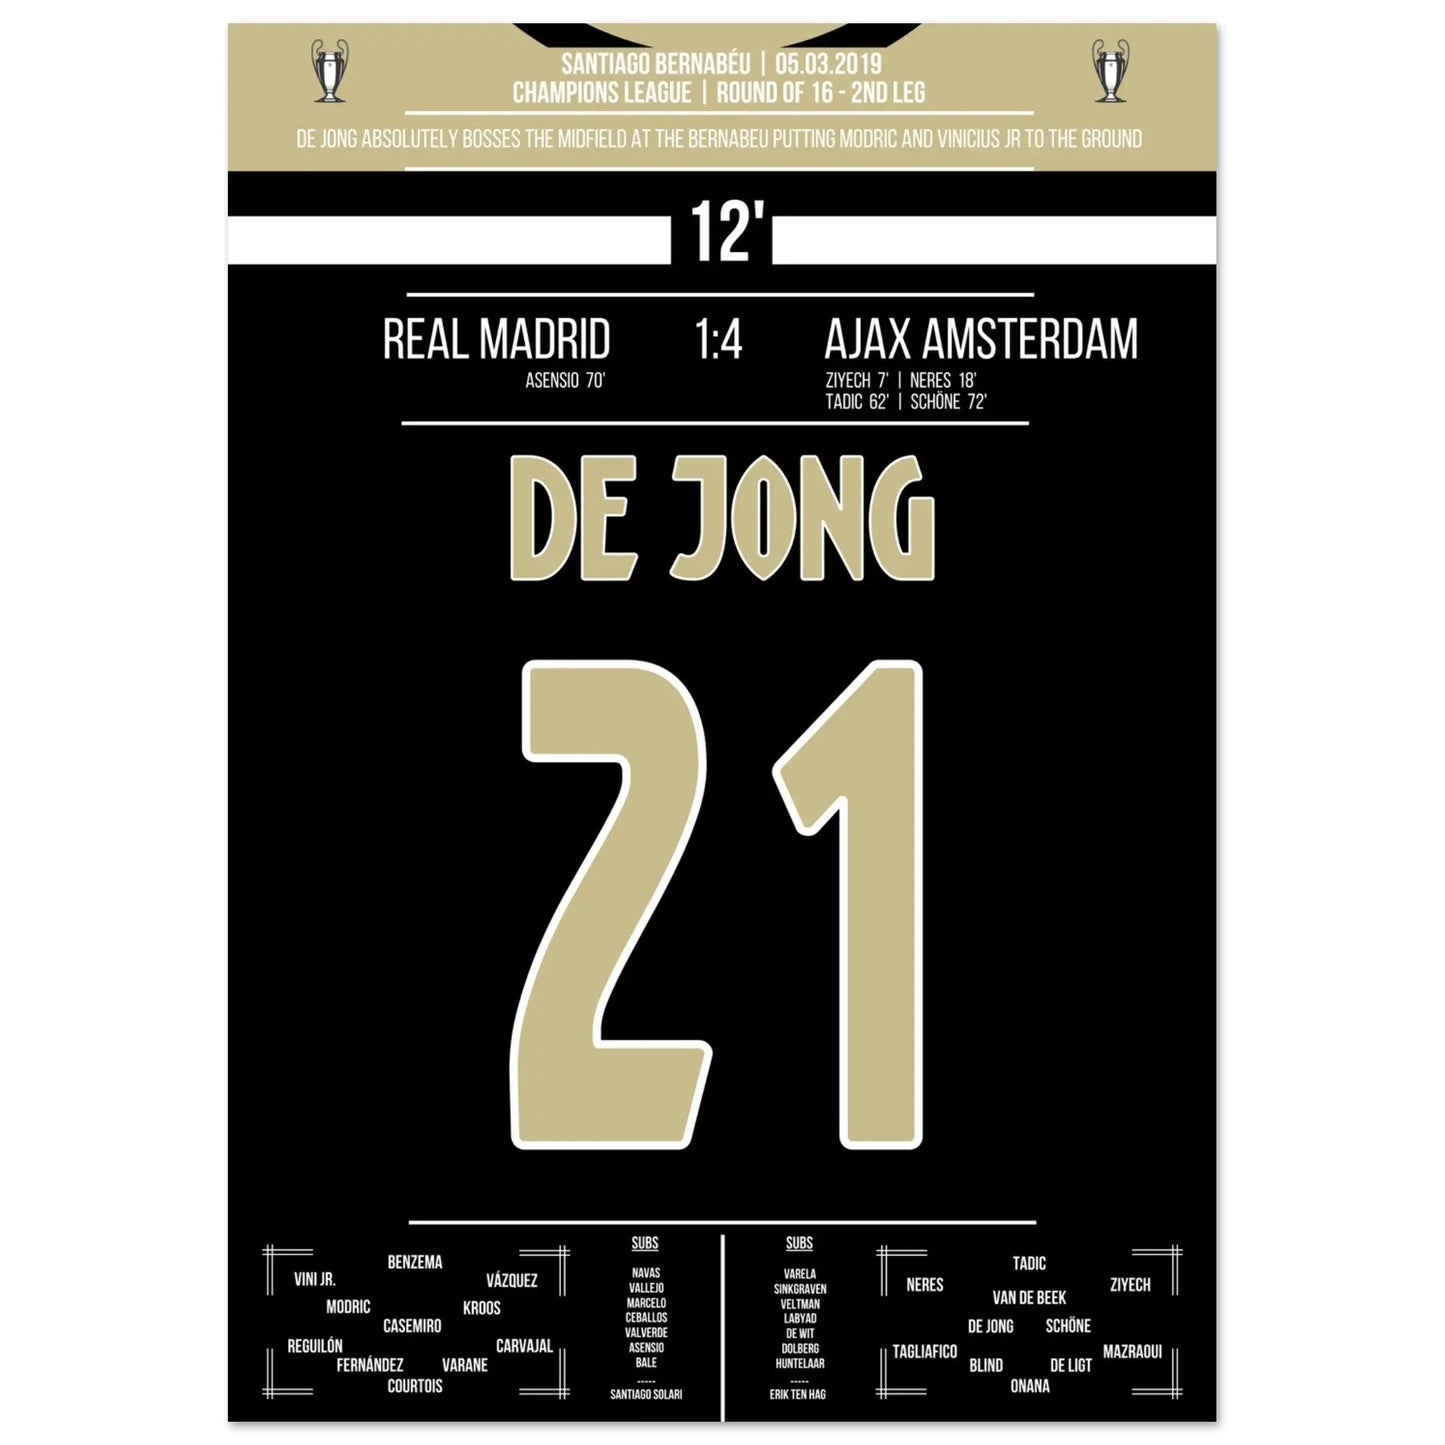 De Jong's magical performance in the Champions League round of 16 against Real